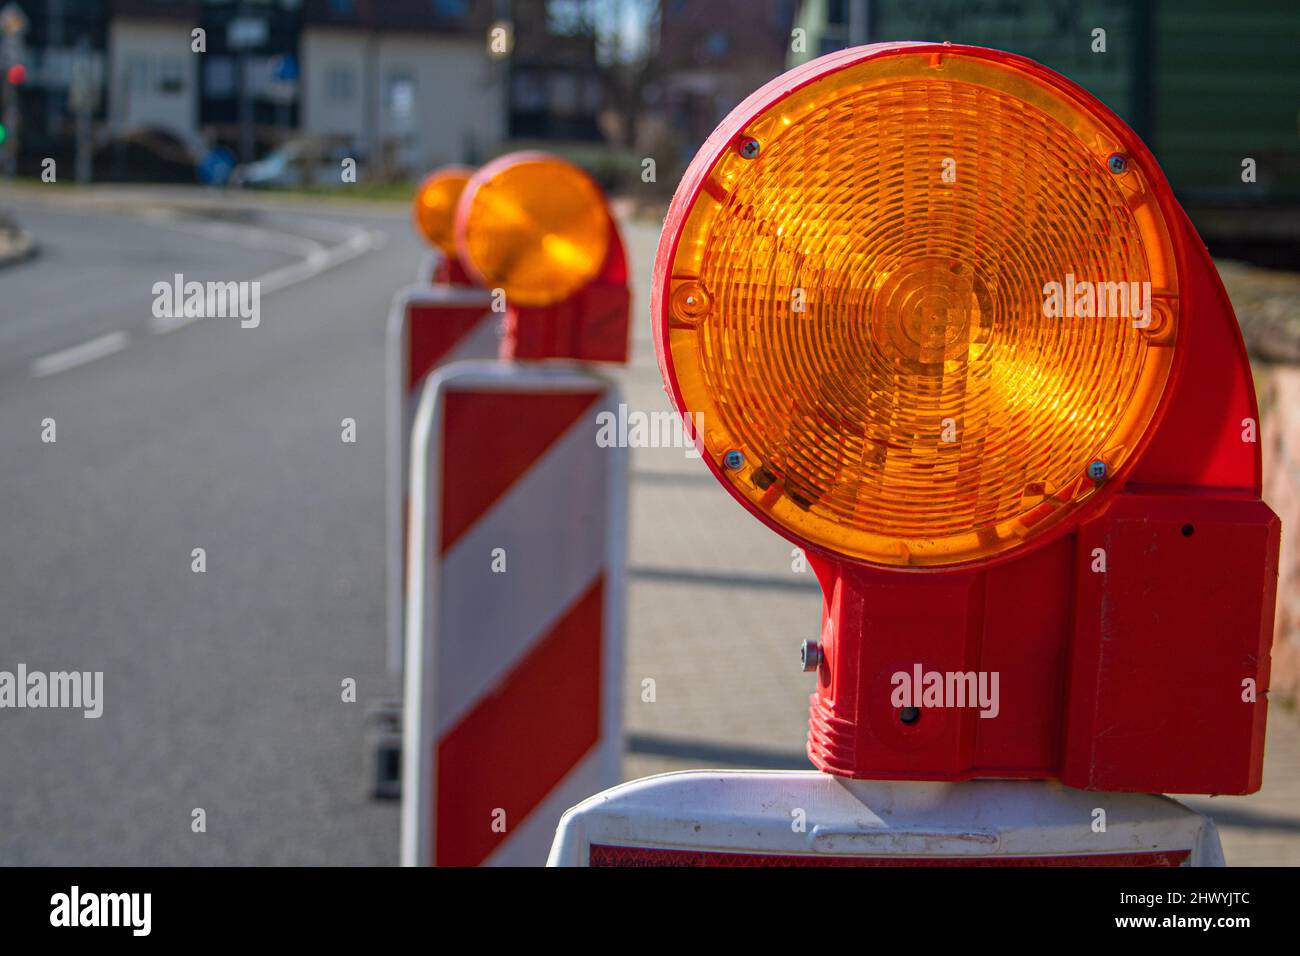 Street barricade with warning Flashing signal lamp on a road Construction site safety, blur site background Stock Photo